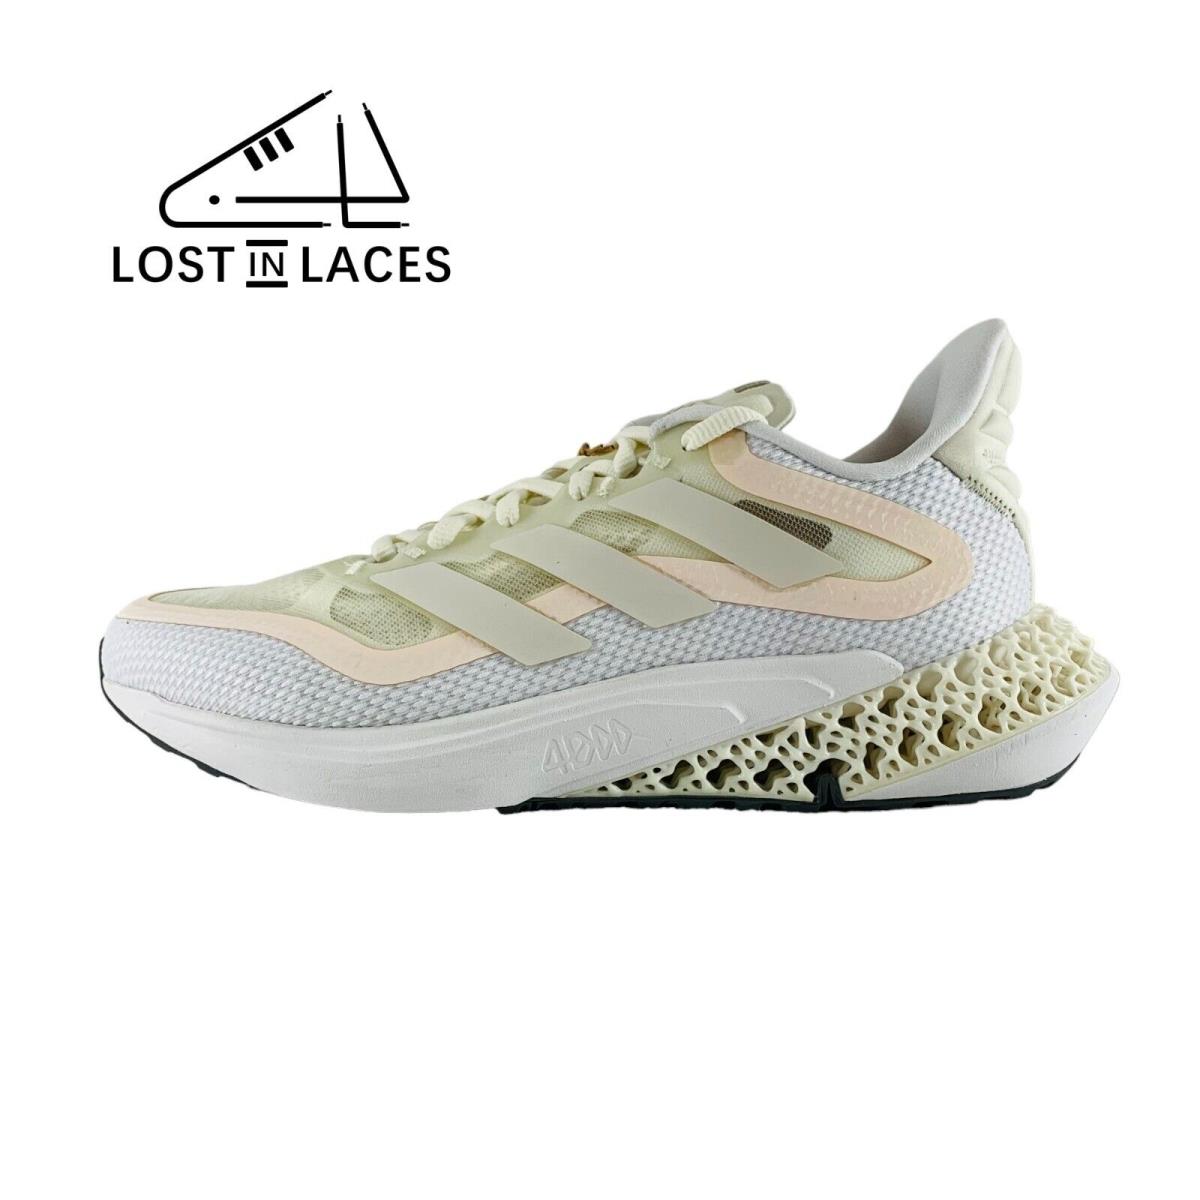 Adidas 4DFWD Pulse 2 Off White Sneakers Running Shoes GY1647 Women`s Sizes - Ivory